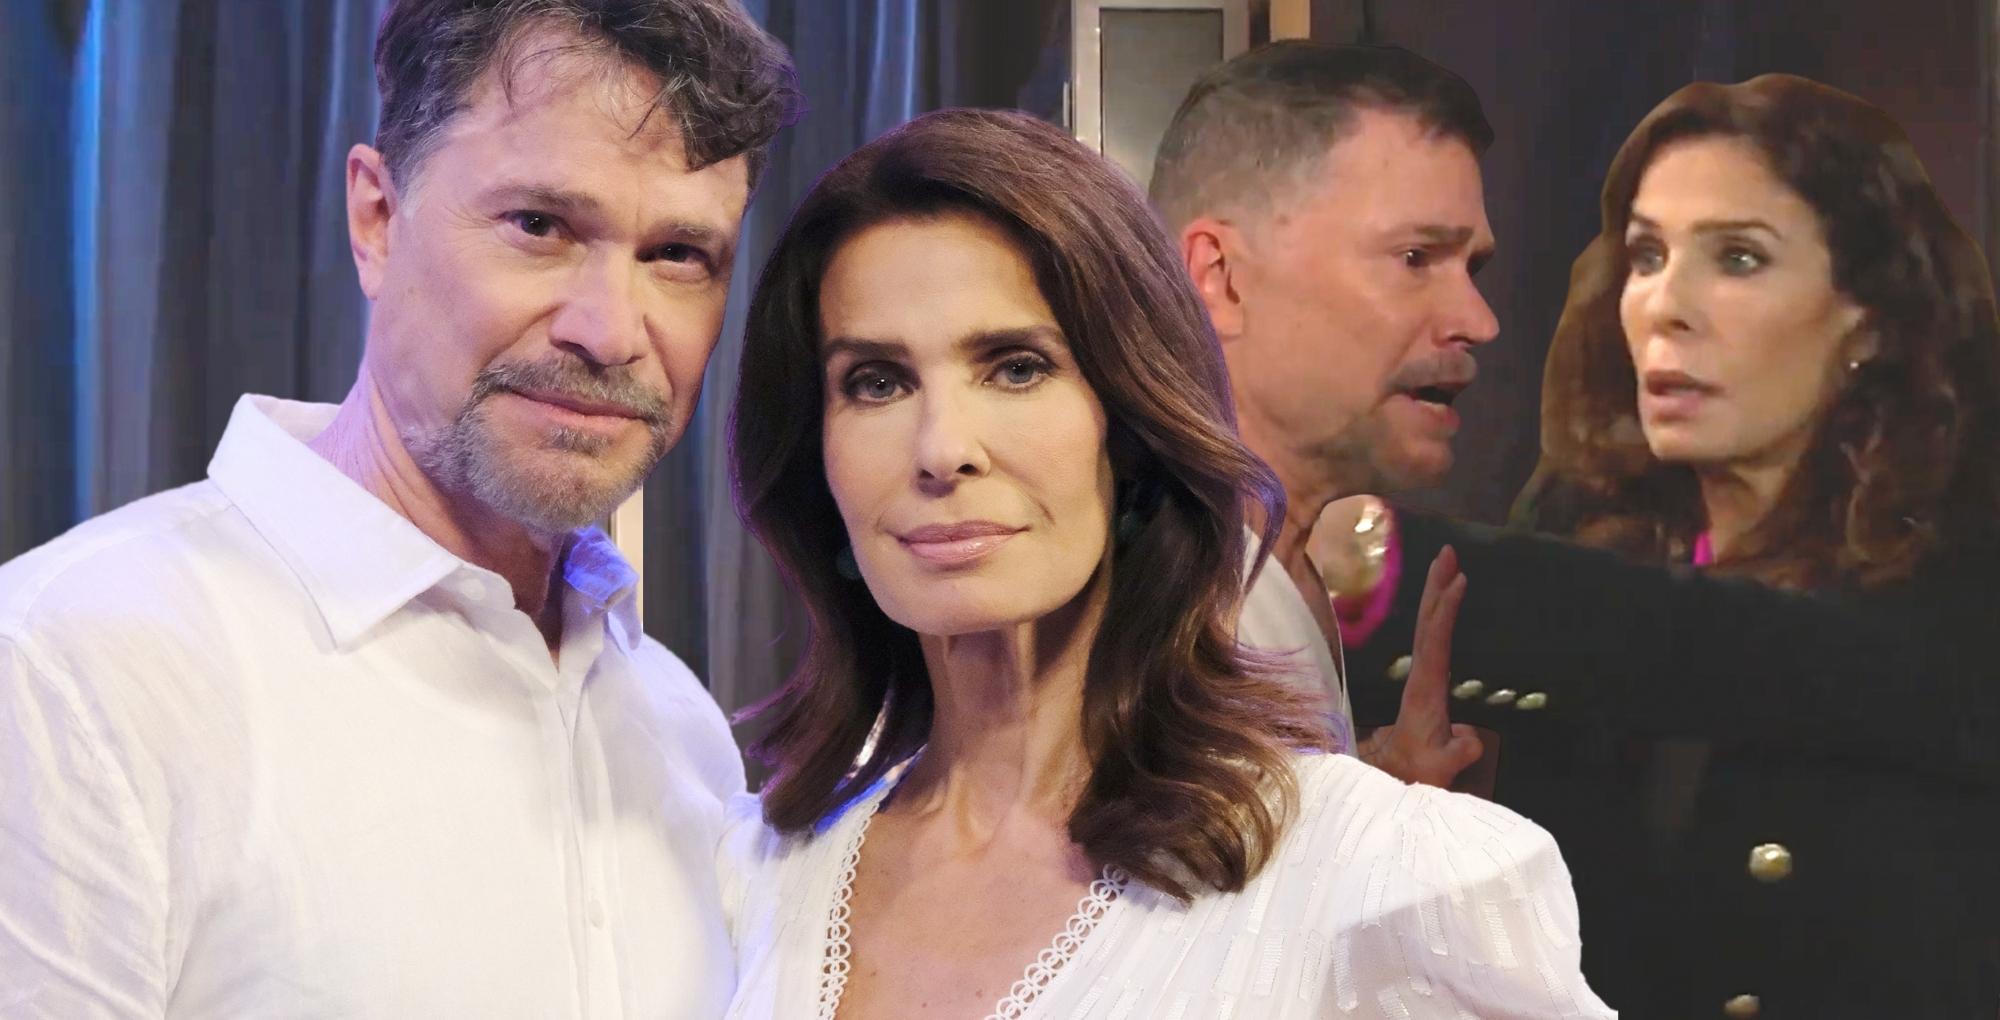 kristian alfonso and peter reckell on why they returned as bo and hope on days of our lives.